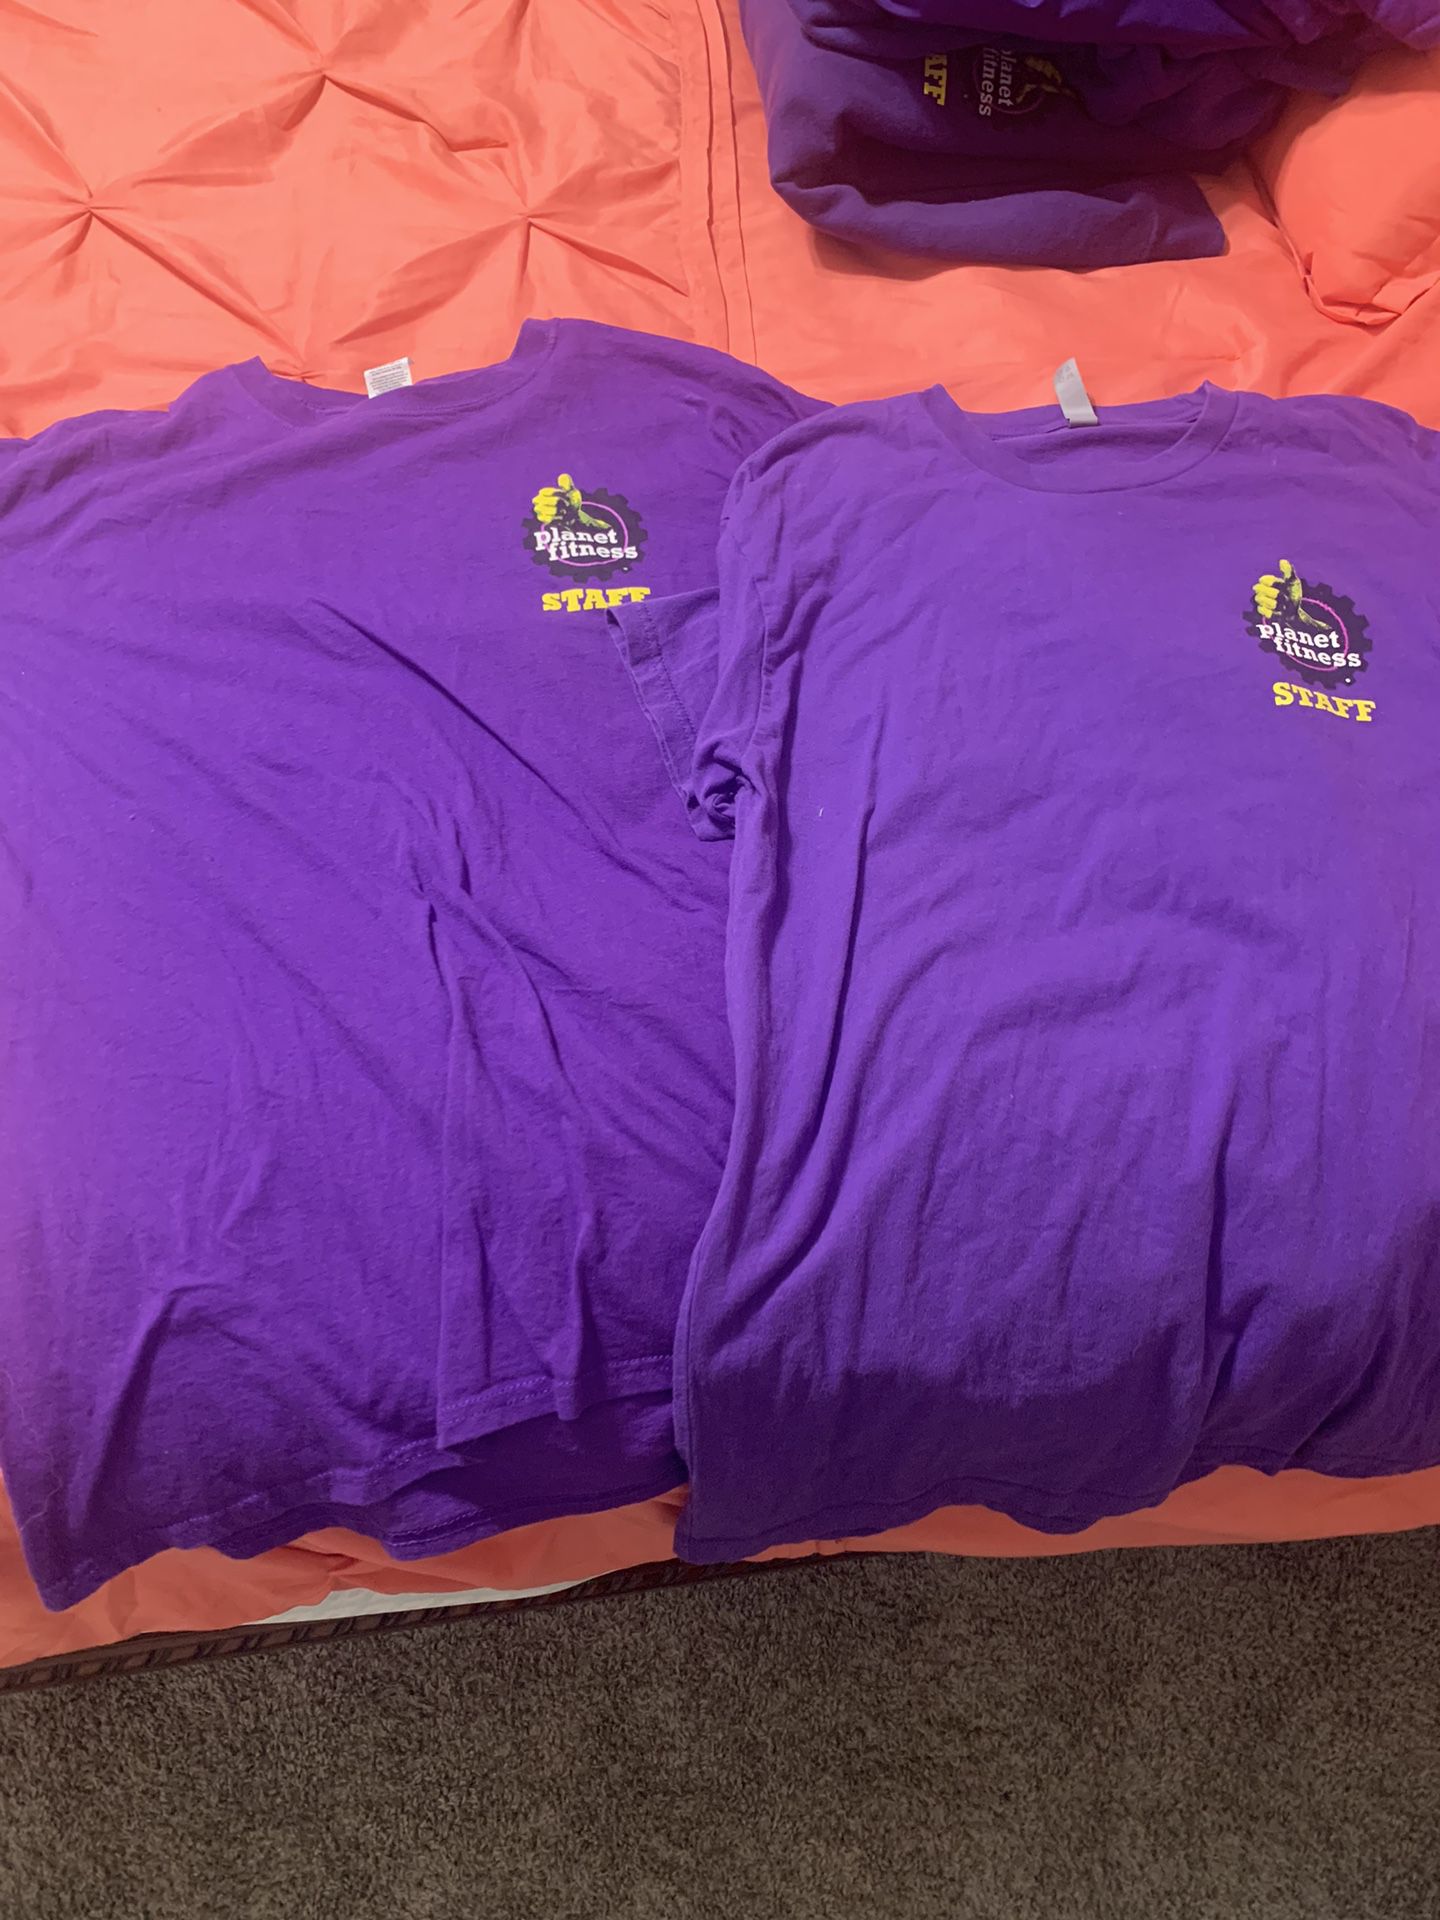 Planet fitness Tops 